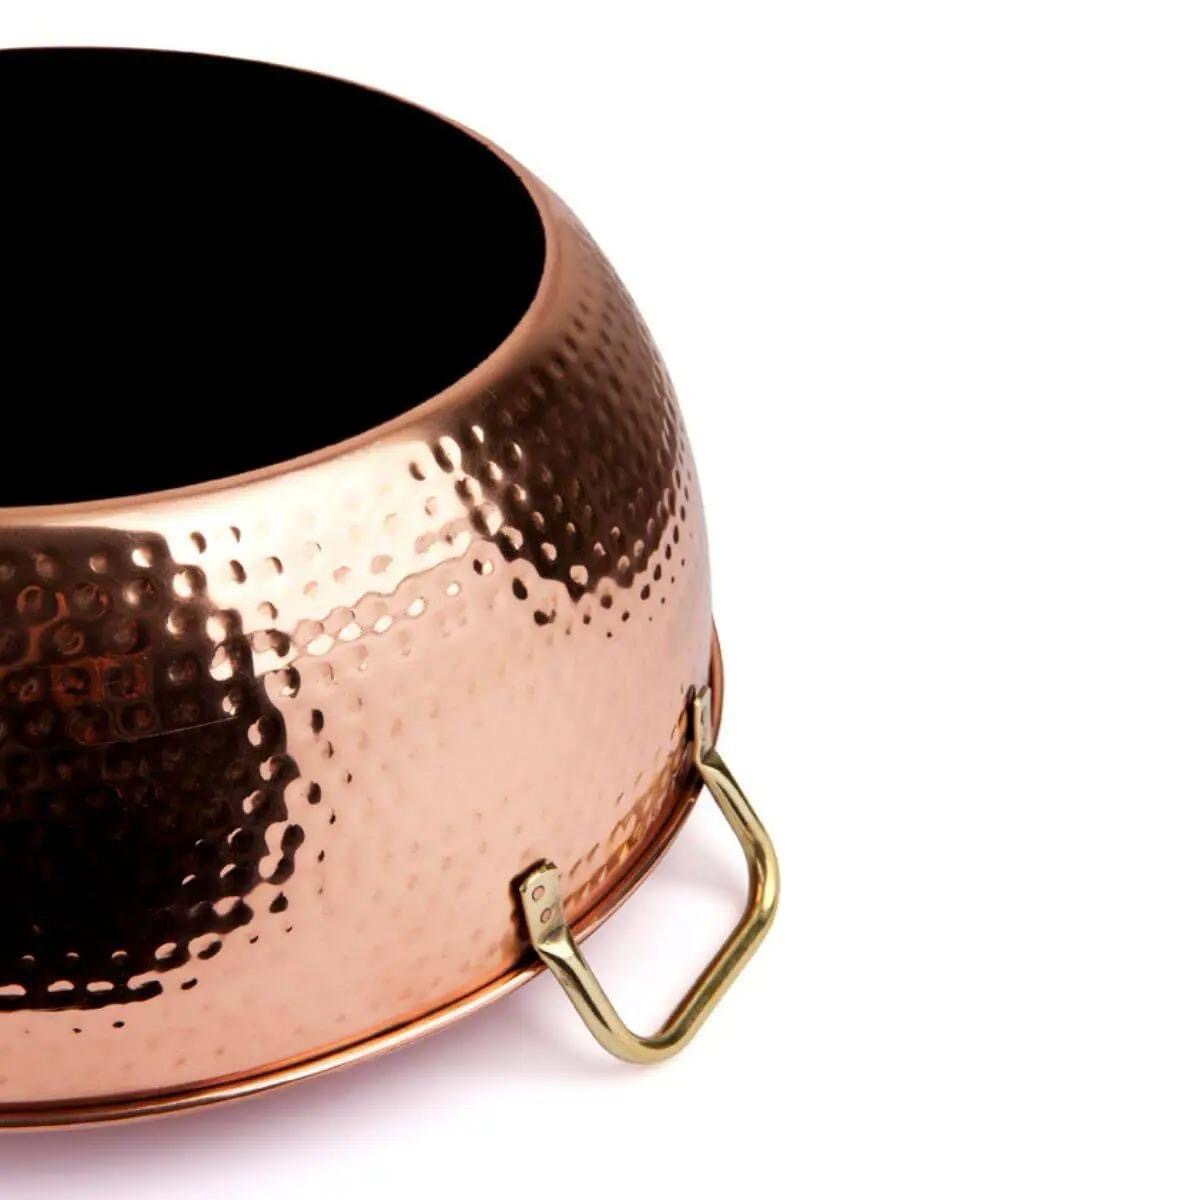 Luxurious Copper Spa Bowl - Pedicure & Foot Soaking Therapy.